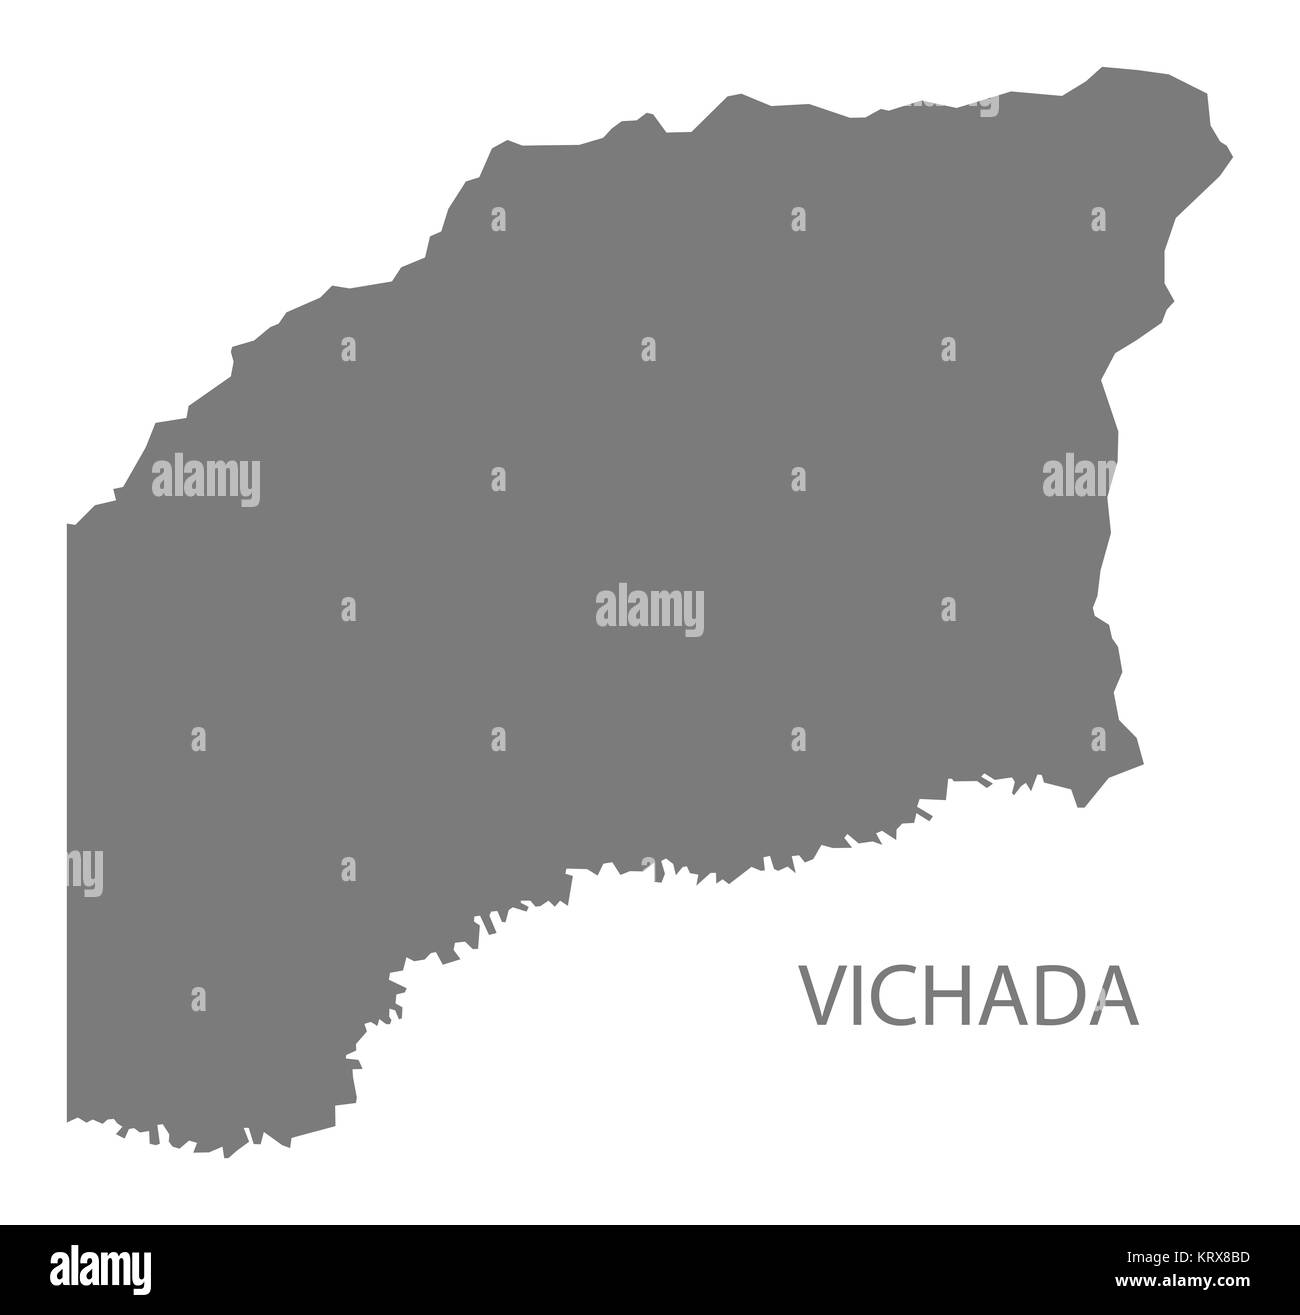 Vichada Colombia Map in grey Stock Photo